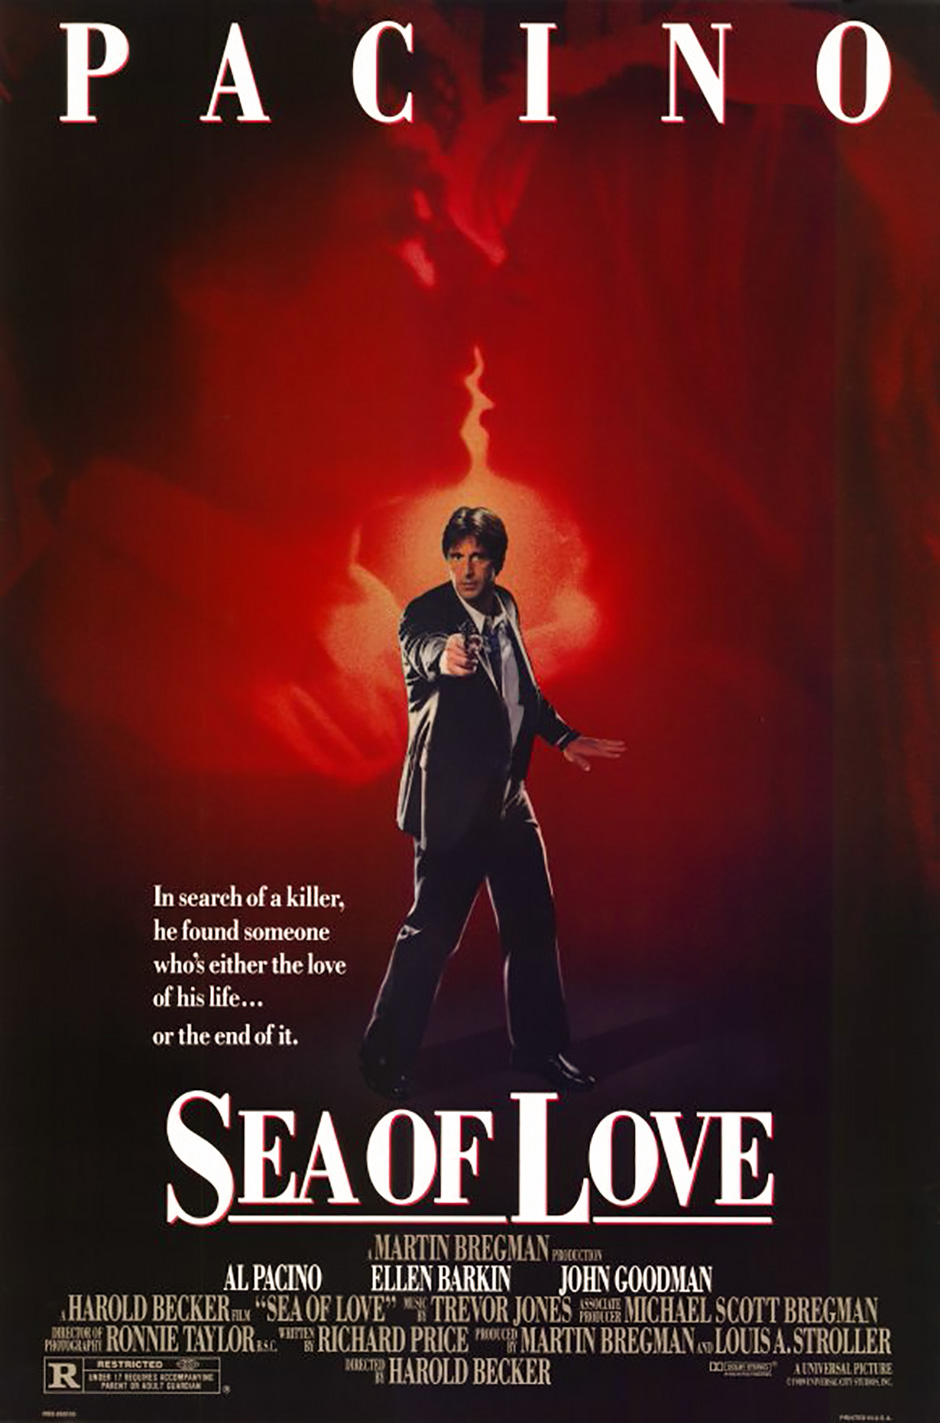 Sea Of Love directed by Harold Becker is Aaron Herrington's movie choice for his 'Offerings' interview